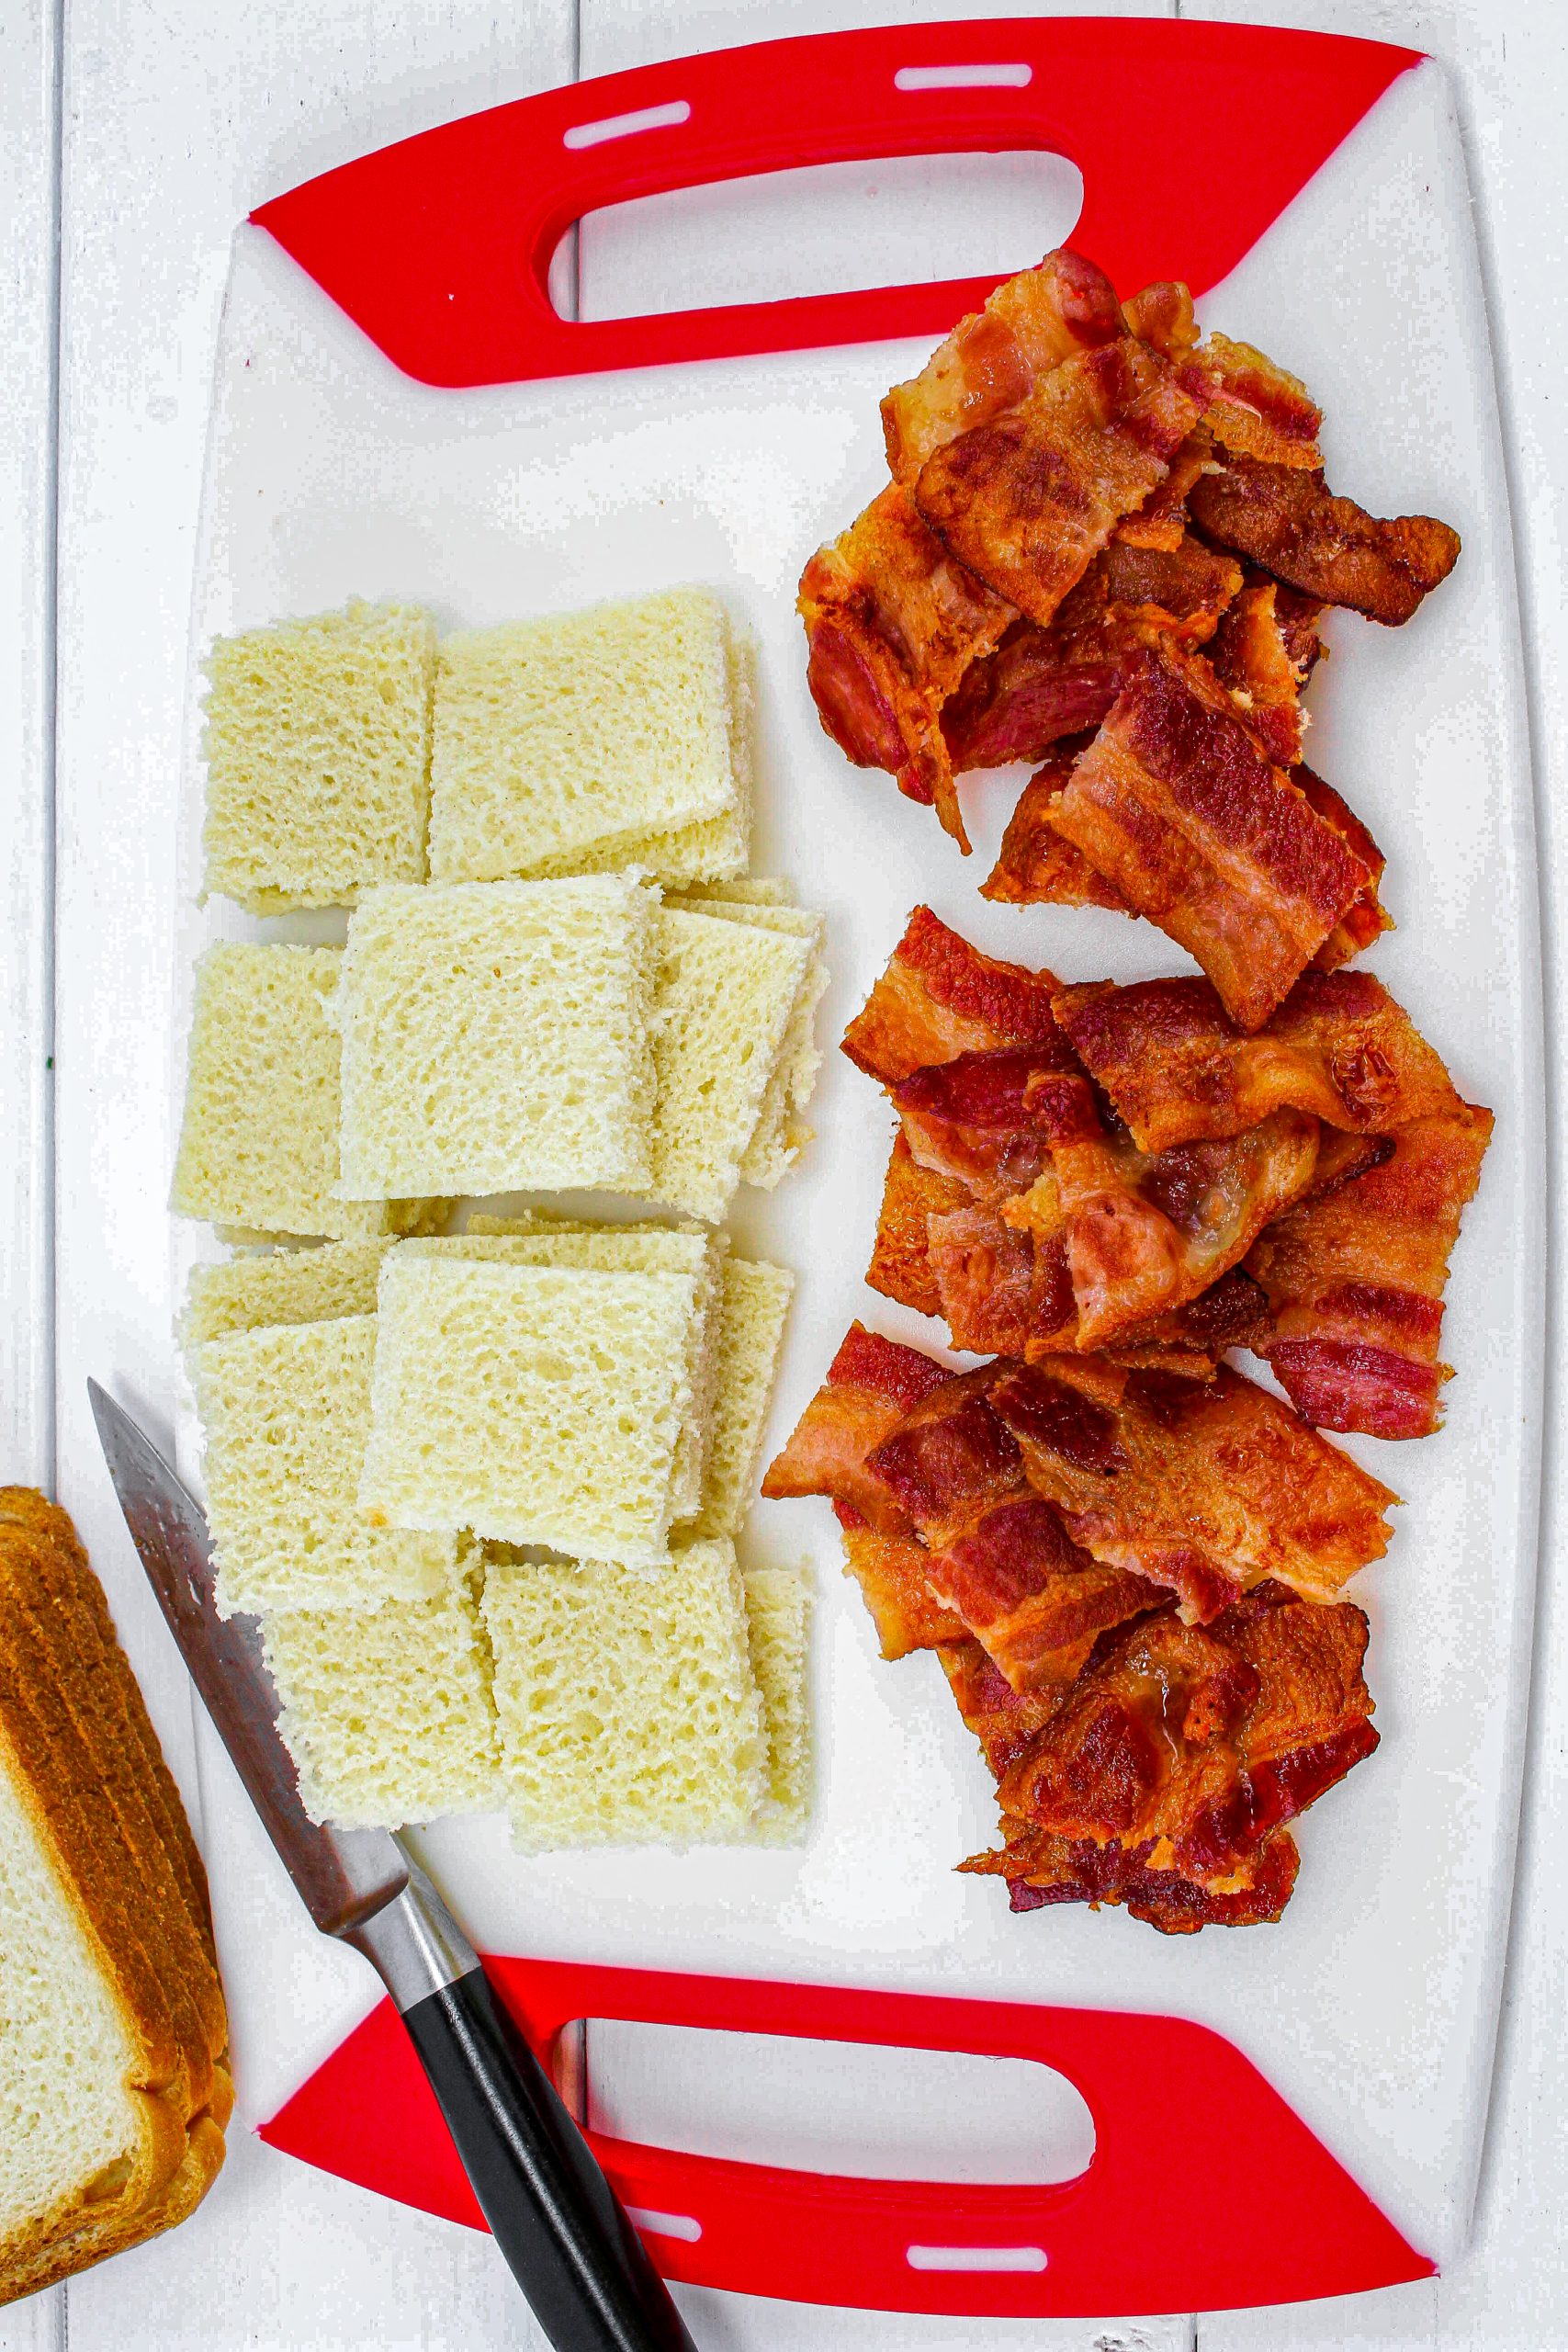 Cook the bacon and cut each piece into 4 small pieces.